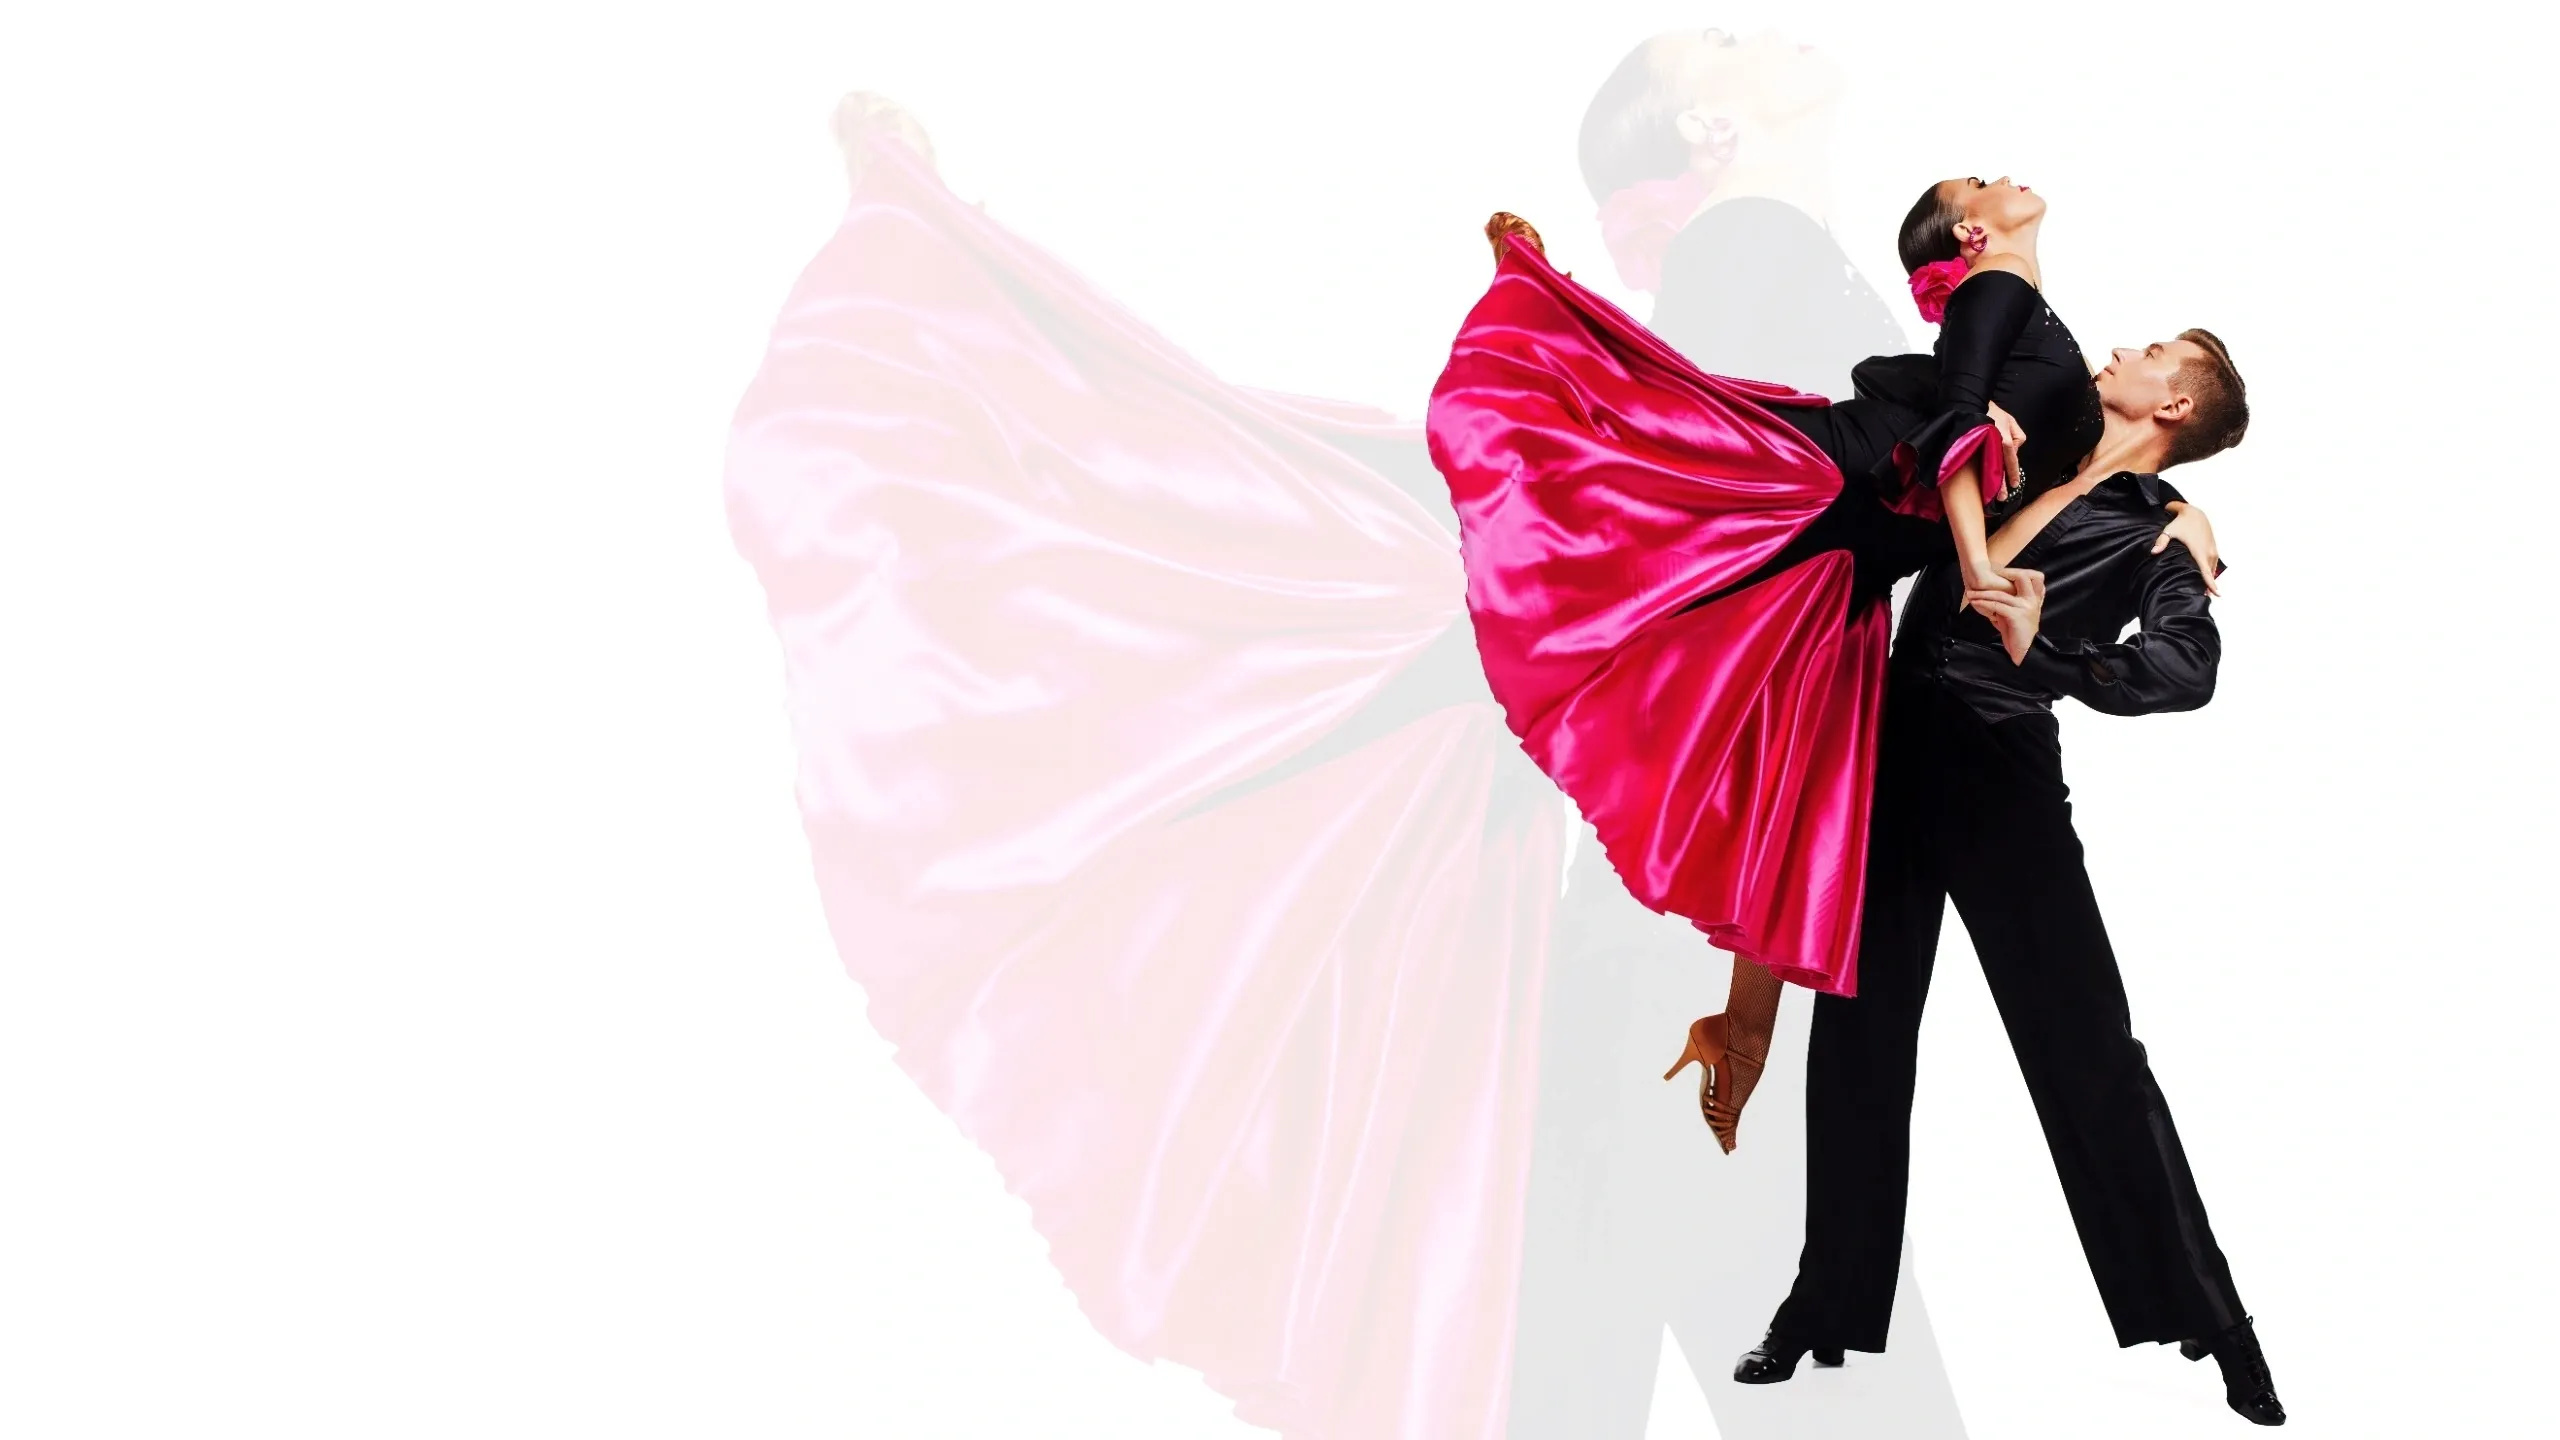 Pasodoble: A lively dance modeled after the drama of the Spanish bullfight, Ballroom dances. 2560x1440 HD Wallpaper.